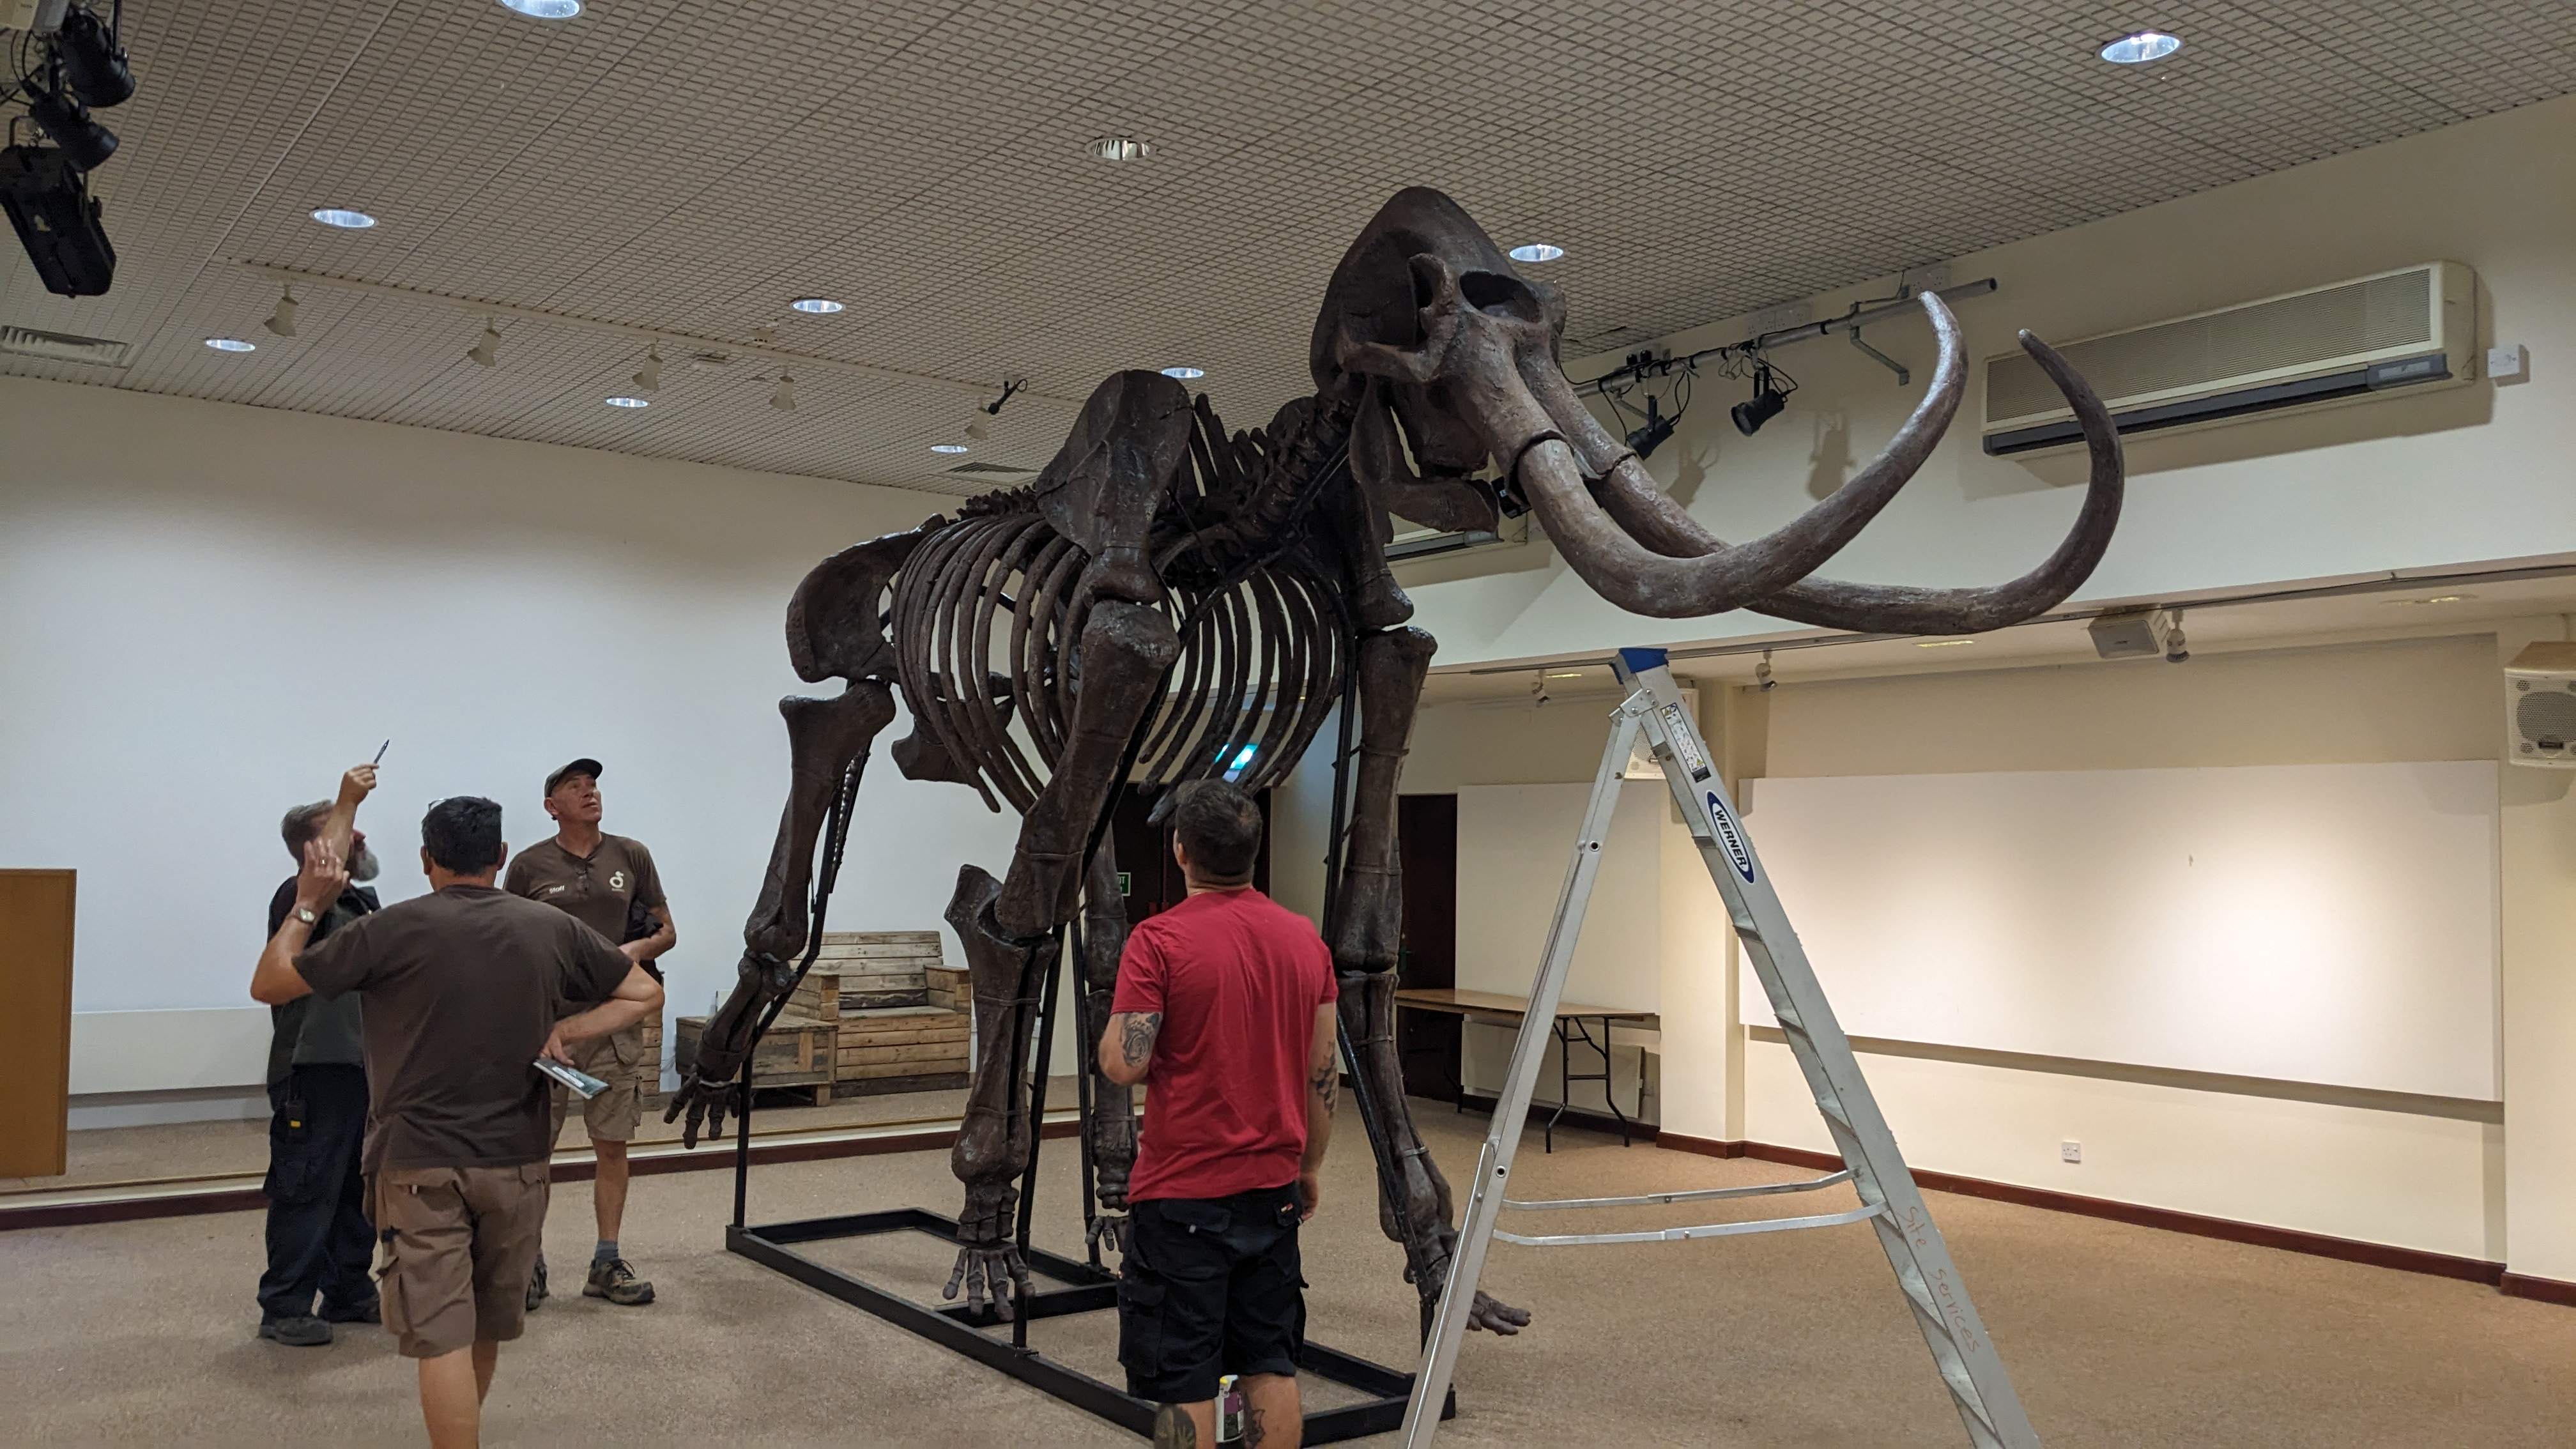 Museum quality Artificial prehistoric animal mammoth skeleton fossile for sale